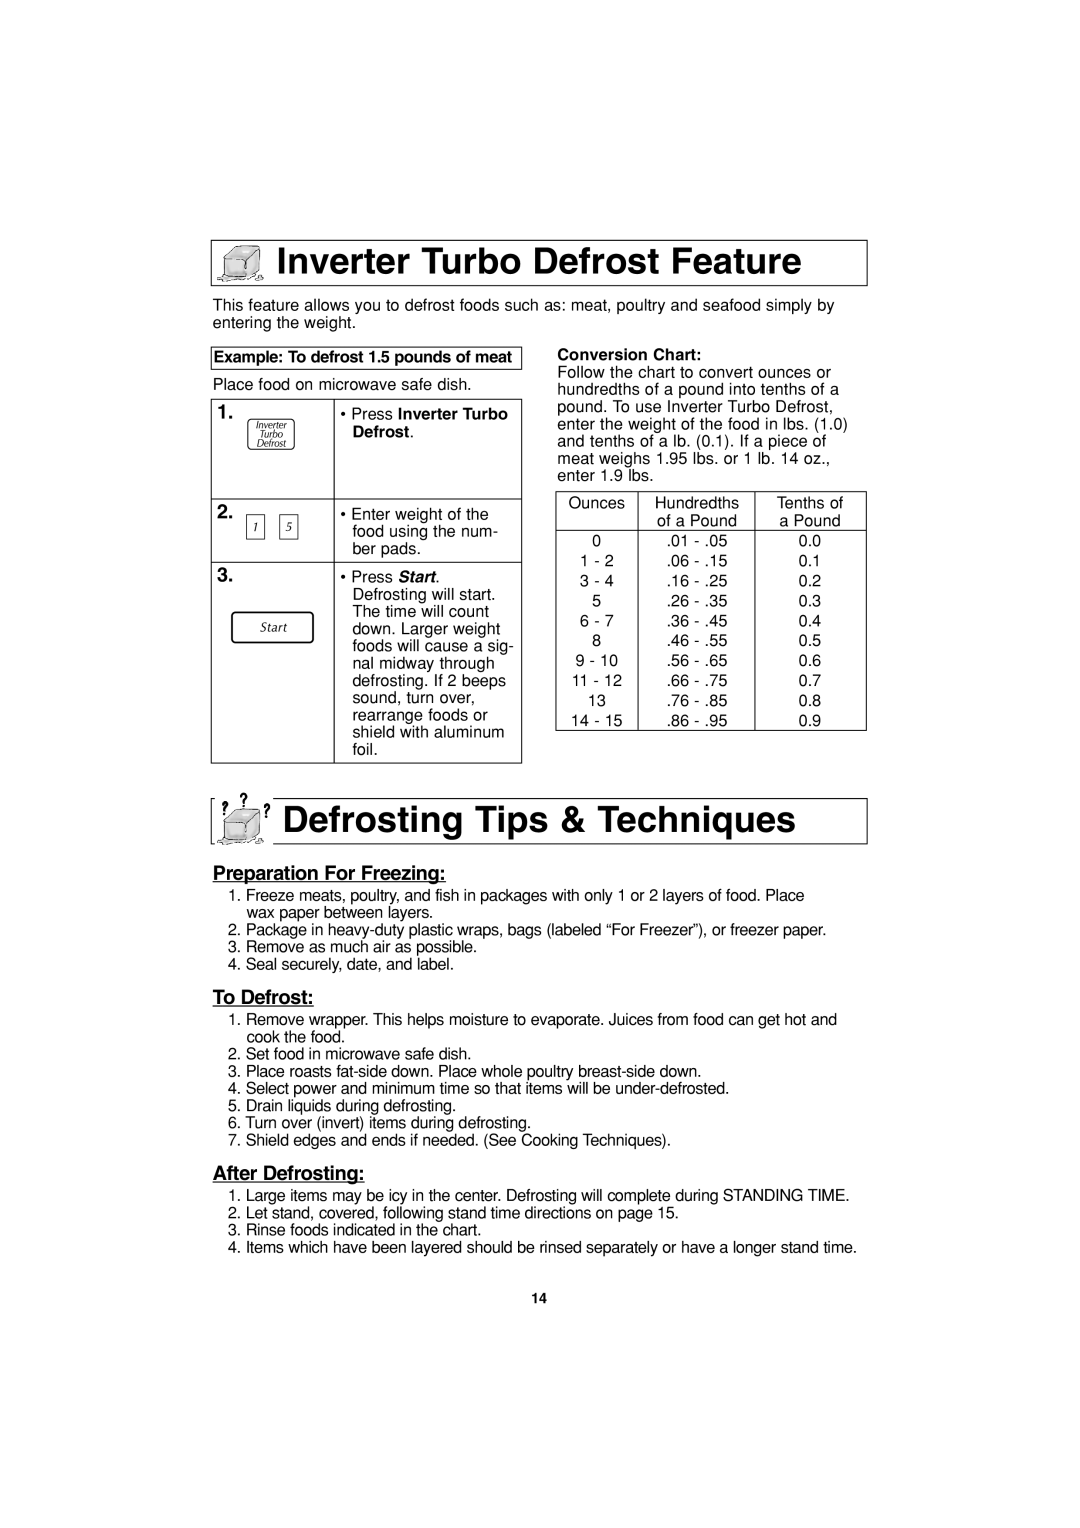 Panasonic NN-T763 Inverter Turbo Defrost Feature, Defrosting Tips & Techniques, Preparation For Freezing, To Defrost 